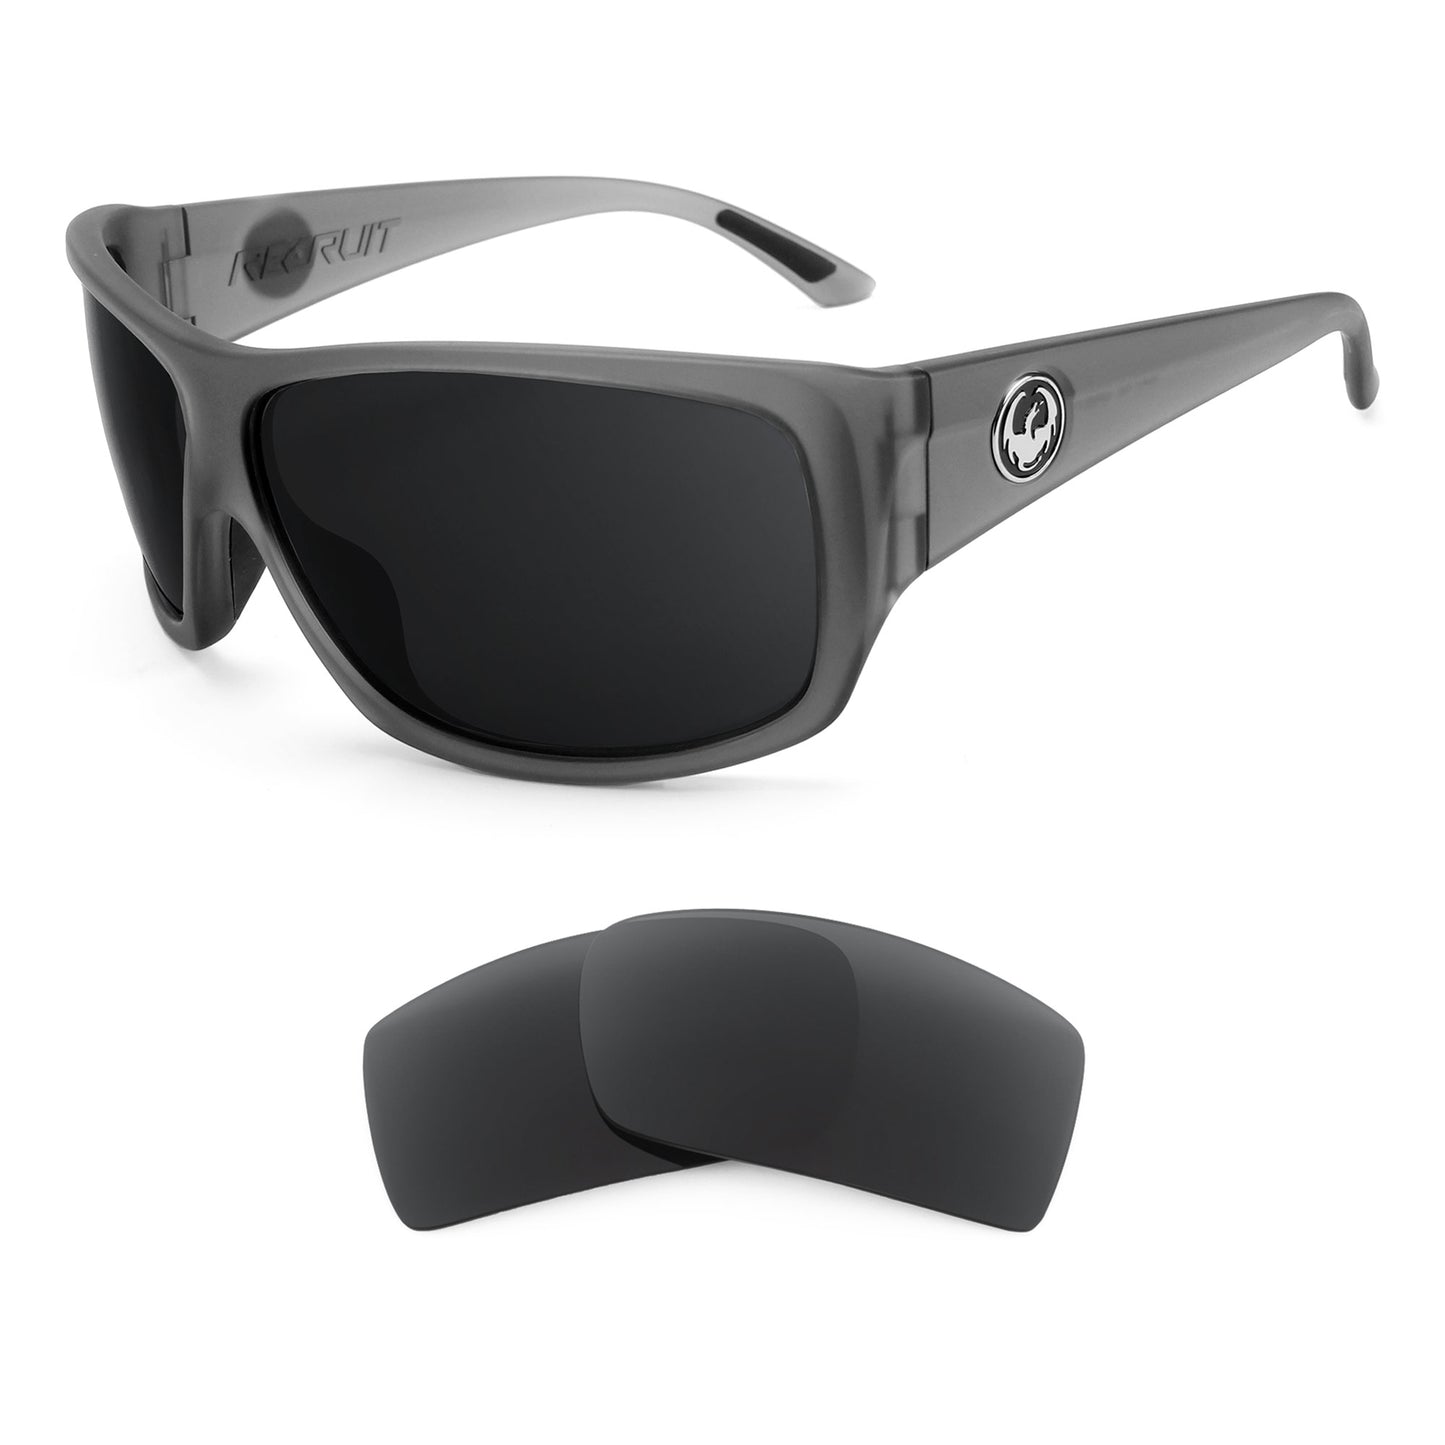 Dragon Recruit sunglasses with replacement lenses